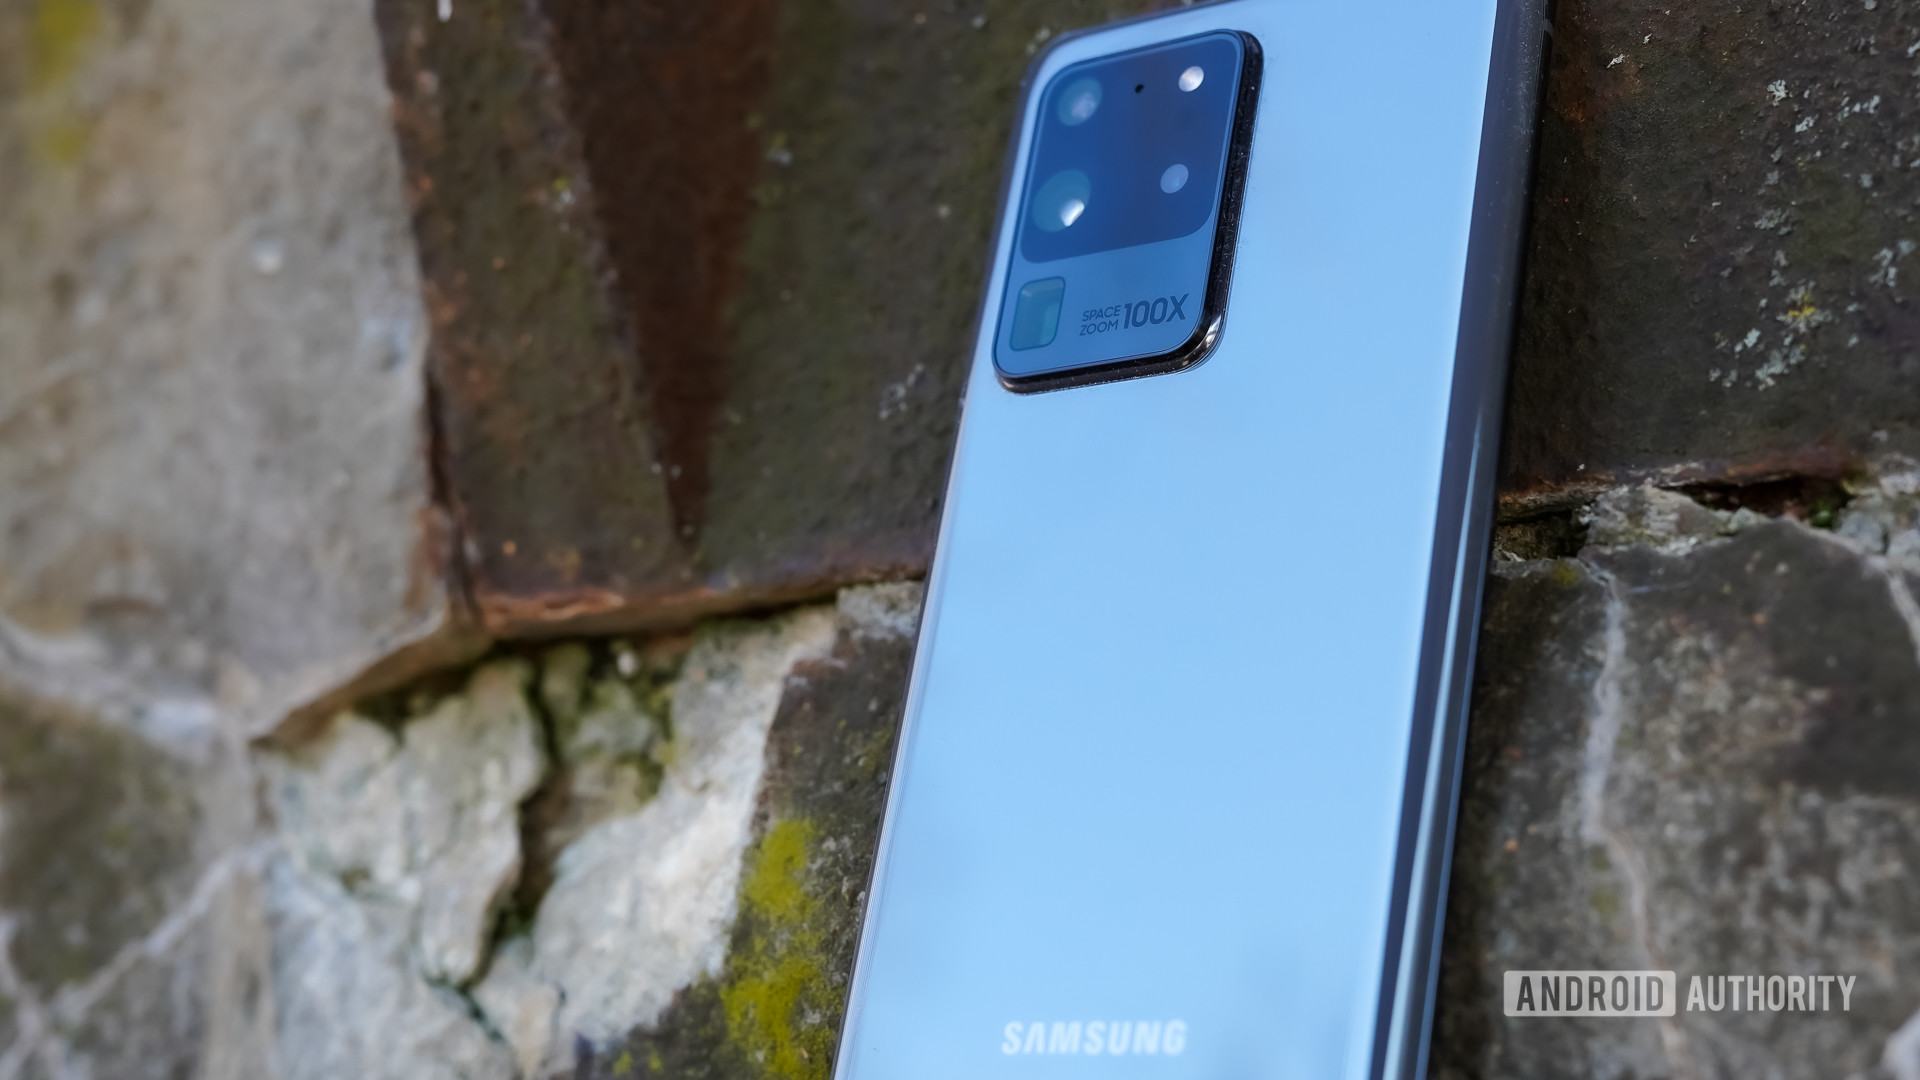 Best Samsung Phones Of 2020 Here Are Our Top Current Picks